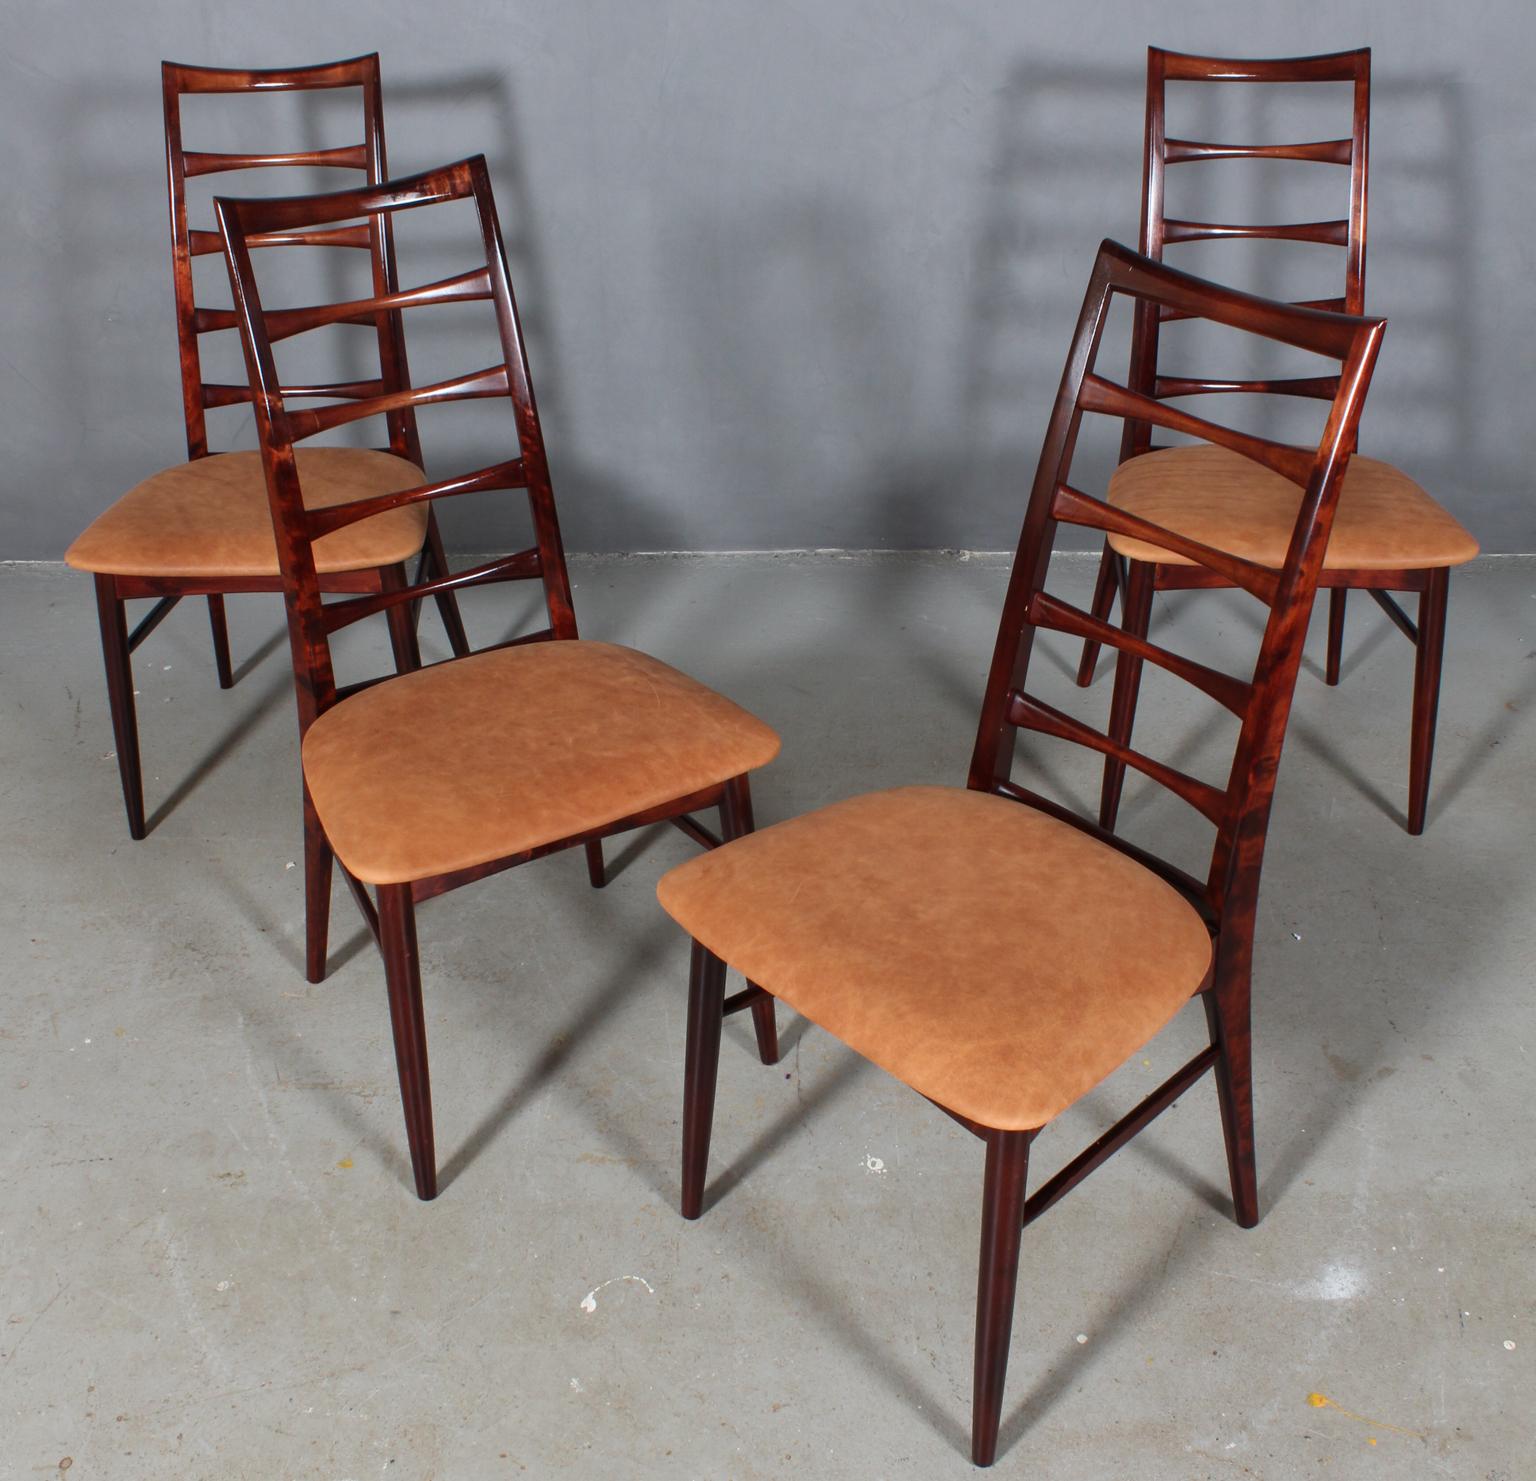 Set of four Niels Koefoed dining chairs made in solid mahogany.

New upholstered in cognac Dunes aniline leather from Arne Sørensen.

Model Lis, made by Niels Koefoeds Møbelfabrik Hornslet, 1960s.